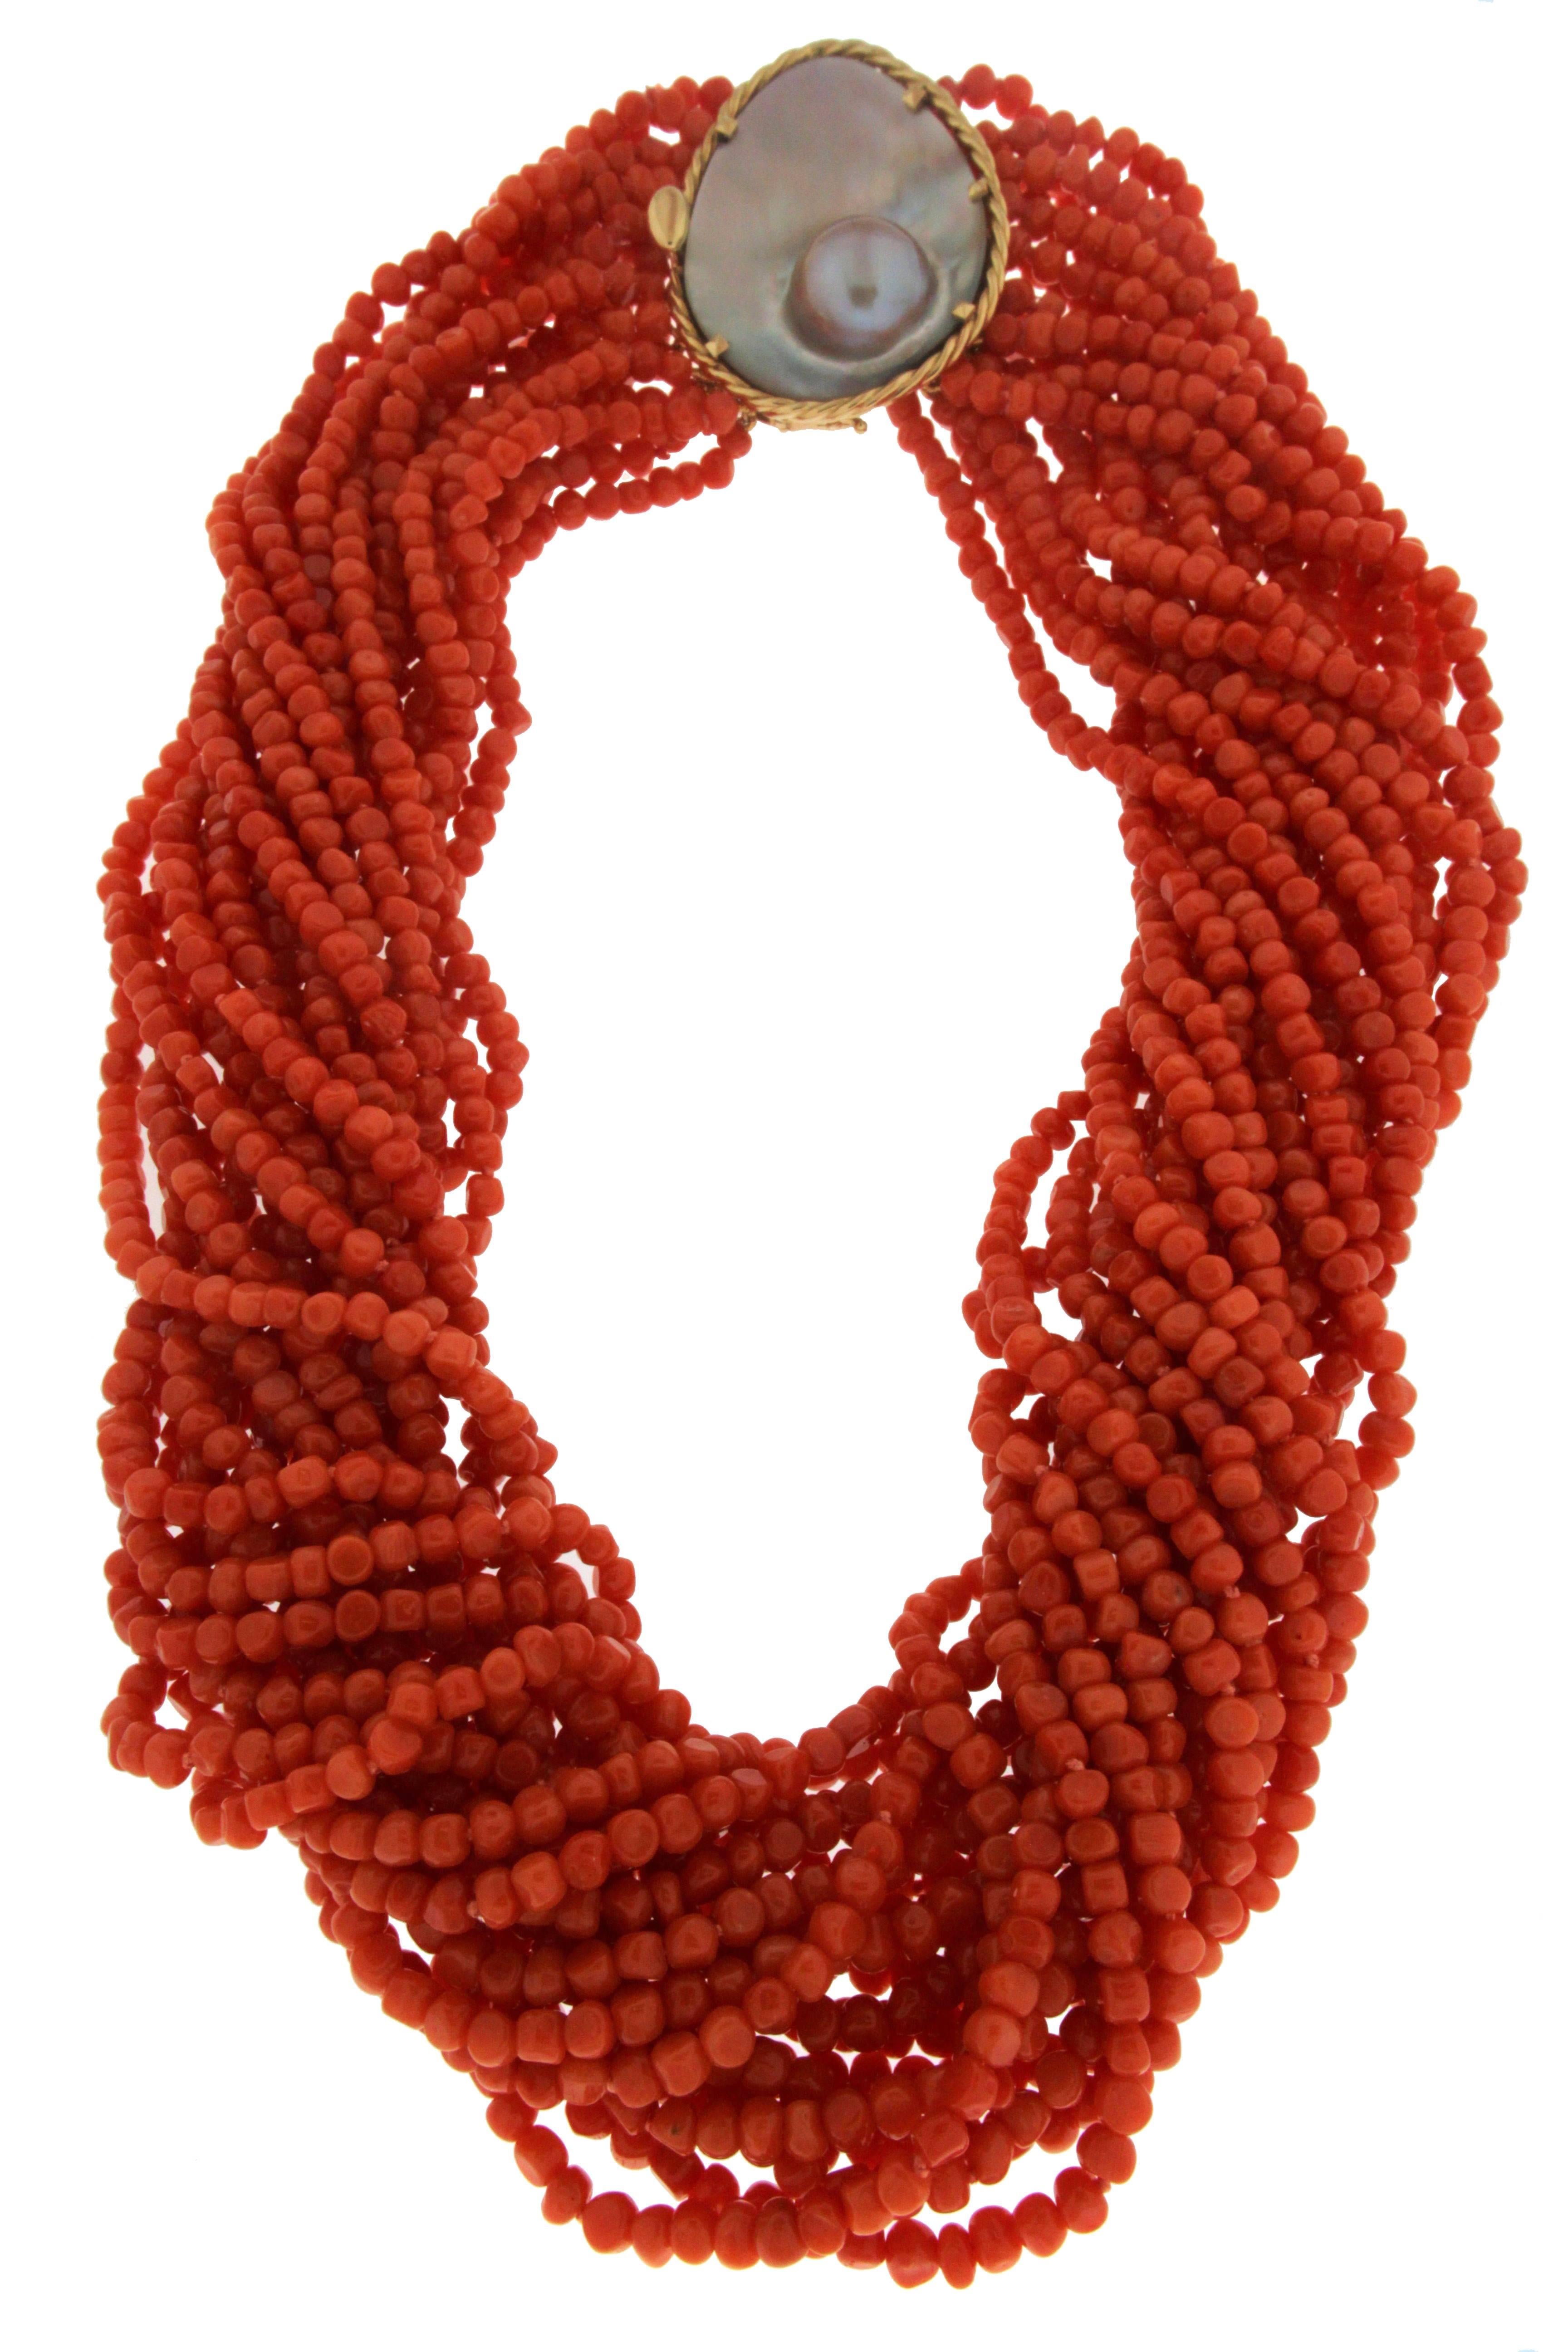 This one of a kind necklace features 19 strands of small nugget shape dark orange coral, half moon blister pearl clasp with 18kt gold frame.